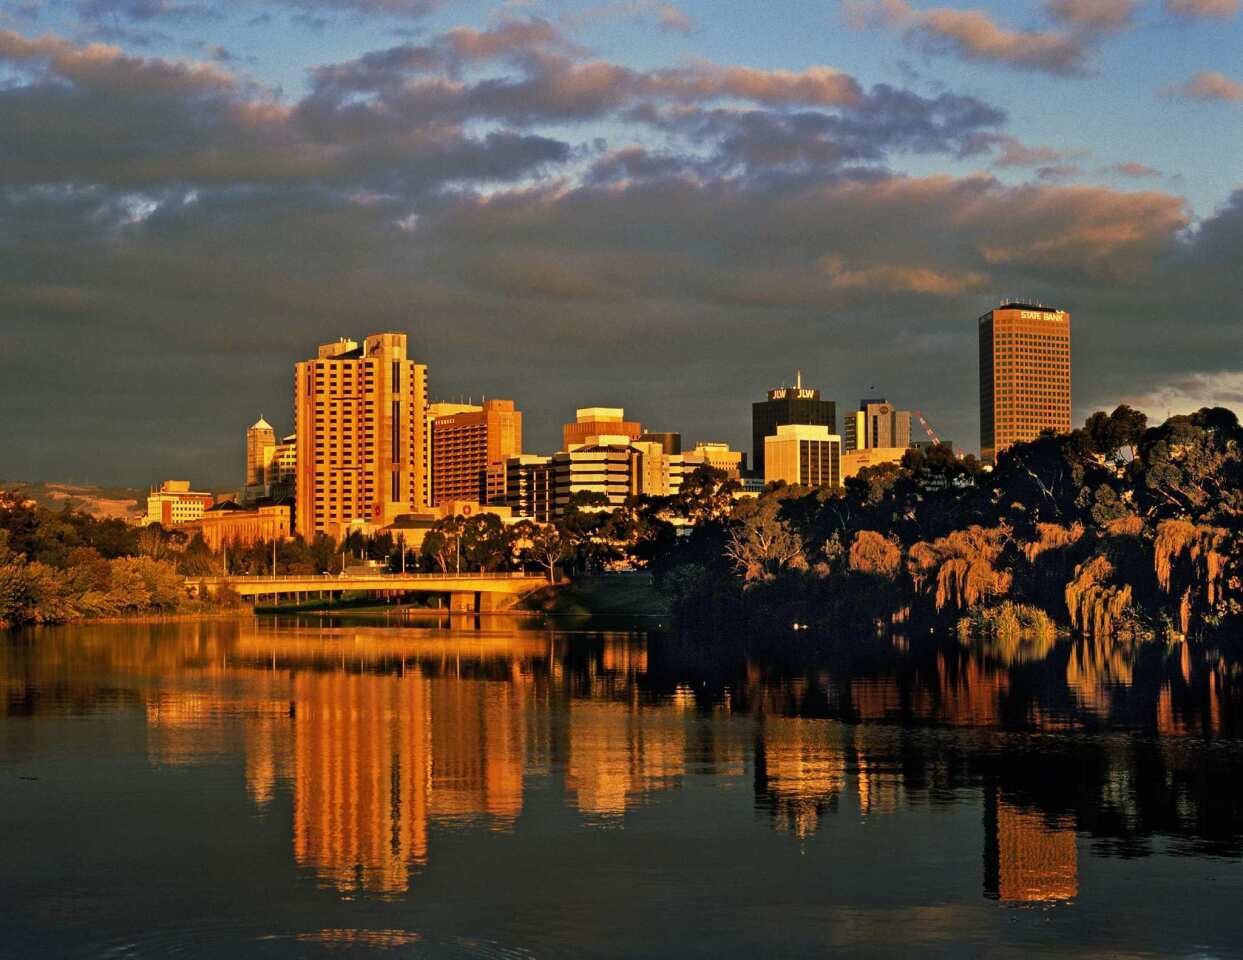 Adelaide, in South Australia, is reflected in Lake Torrens at dusk.